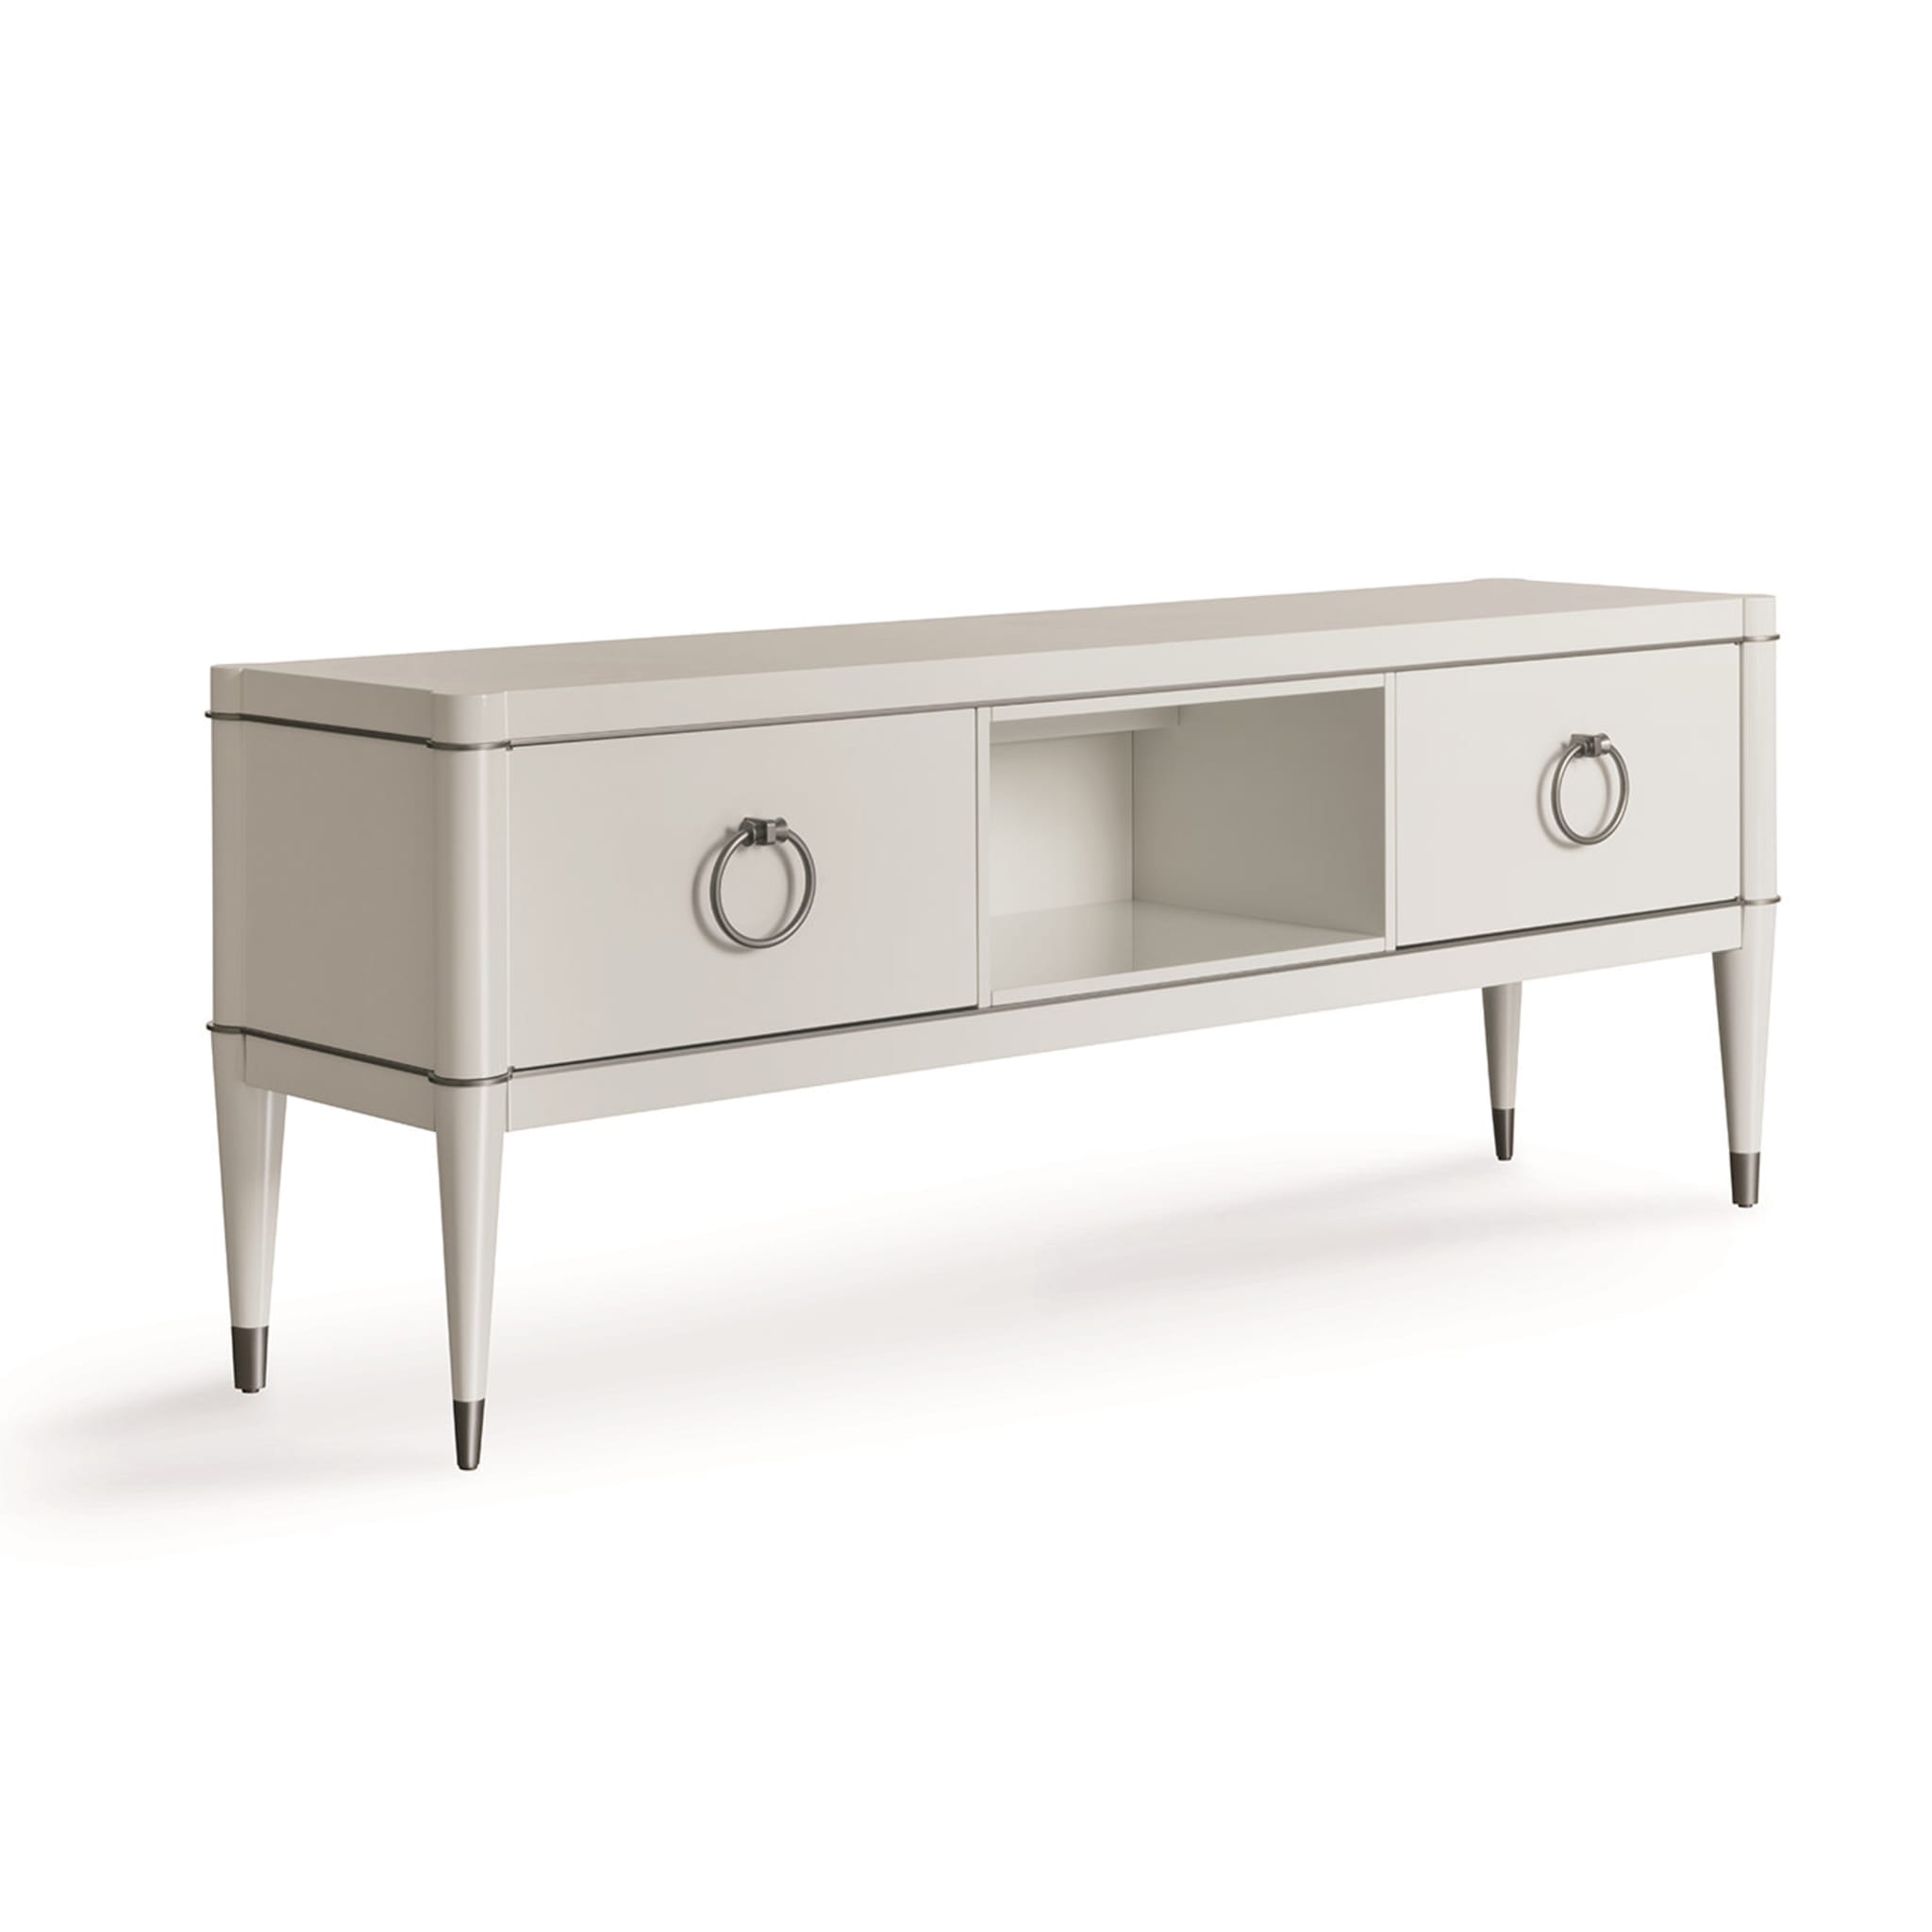 Ambra sideboard tv stand - Alternative view 2